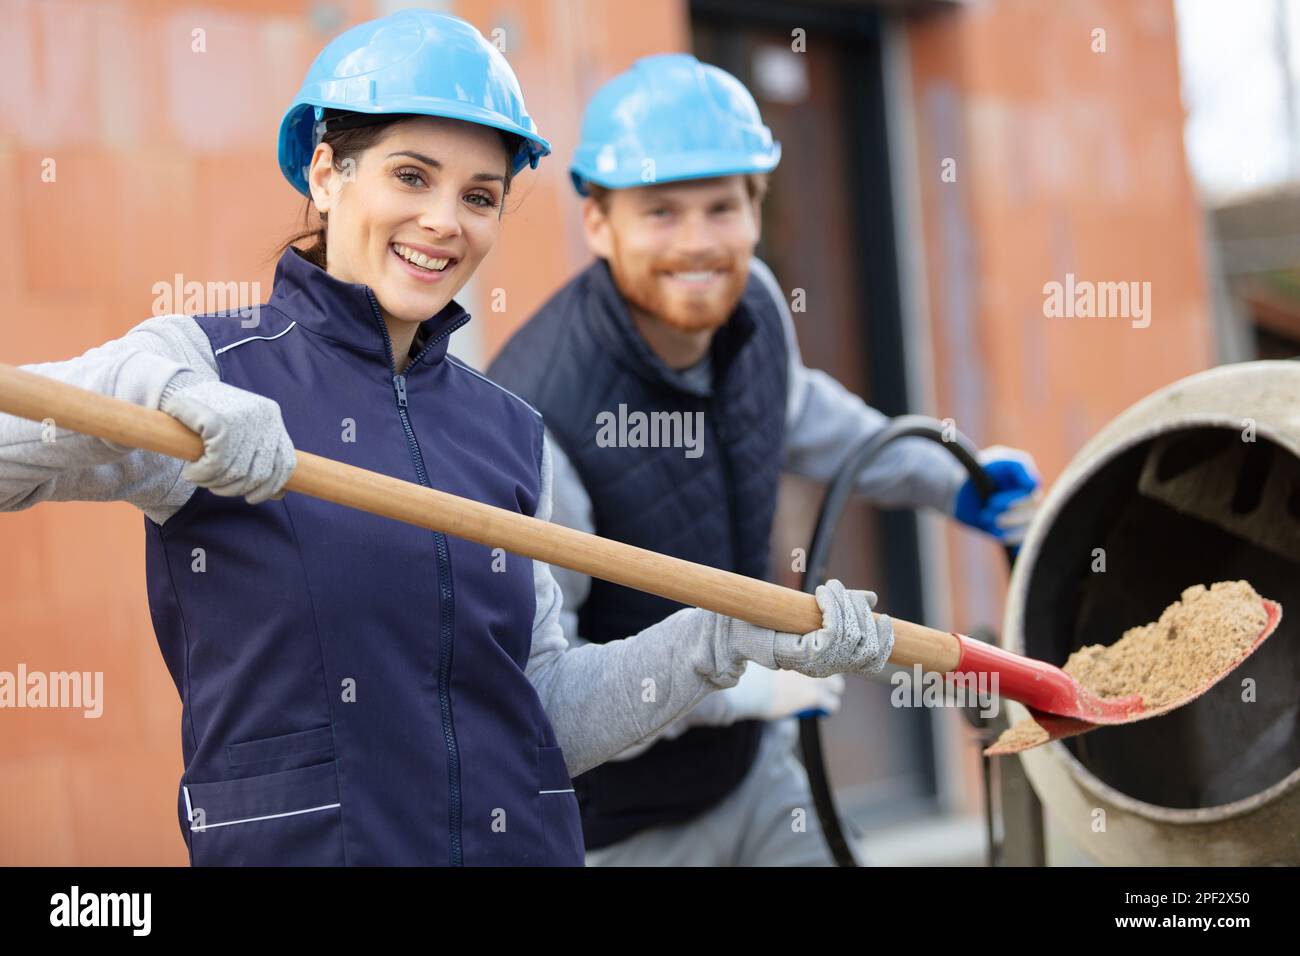 female builder loading sand into cement mixer Stock Photo